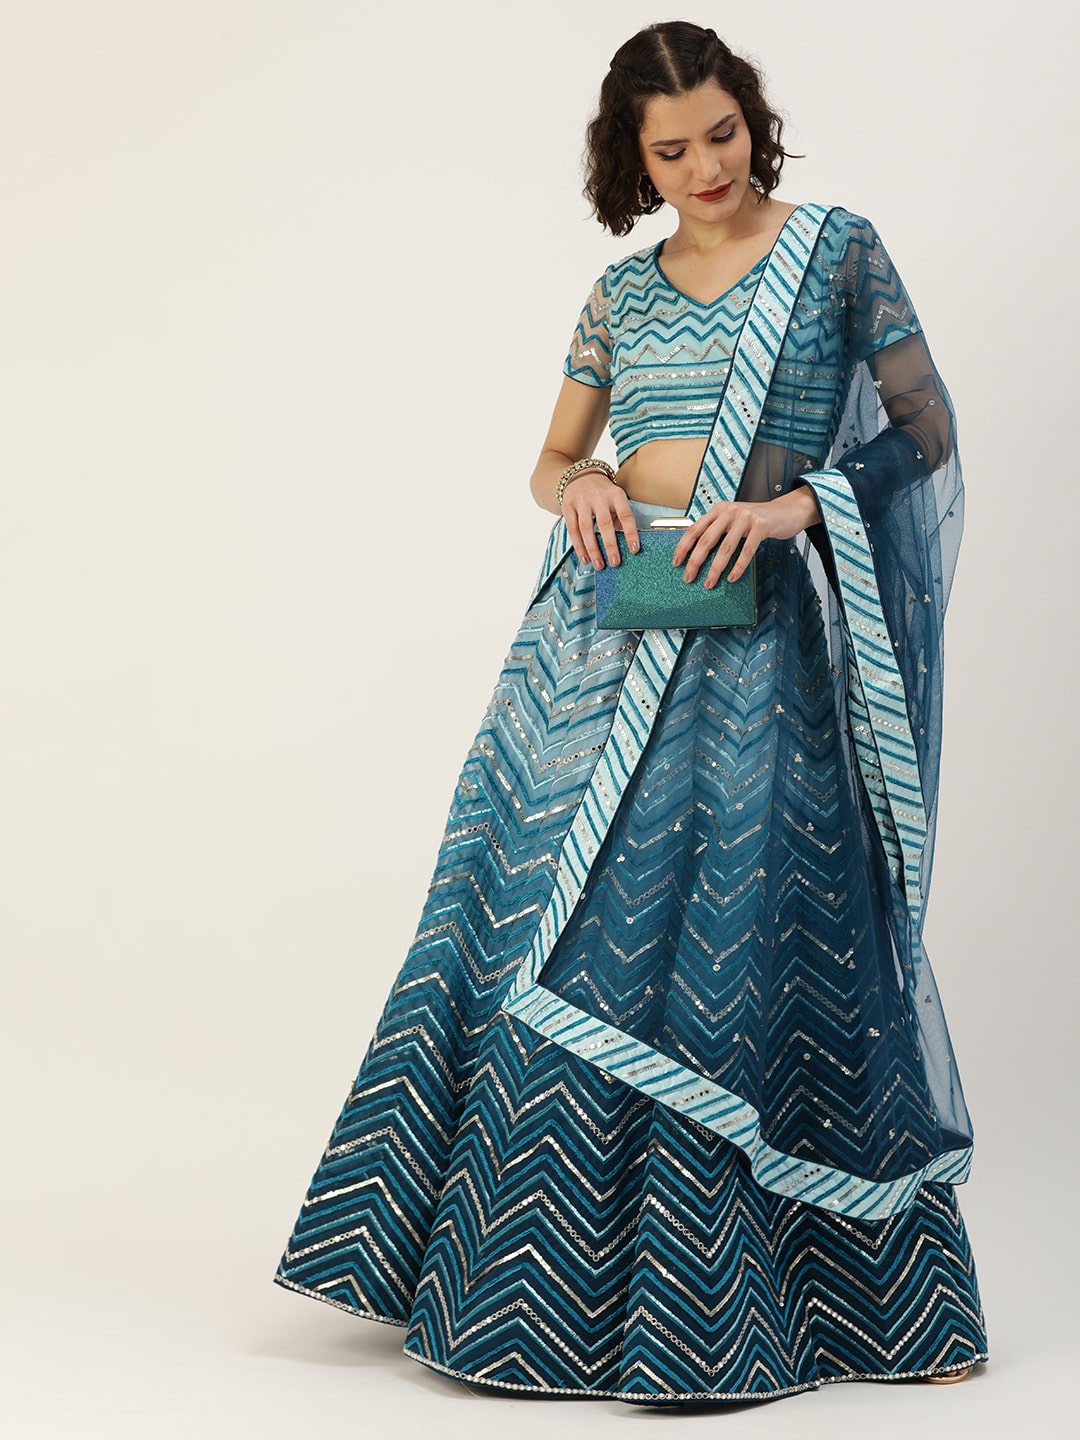 Teal Embroidered Lehenga in Net